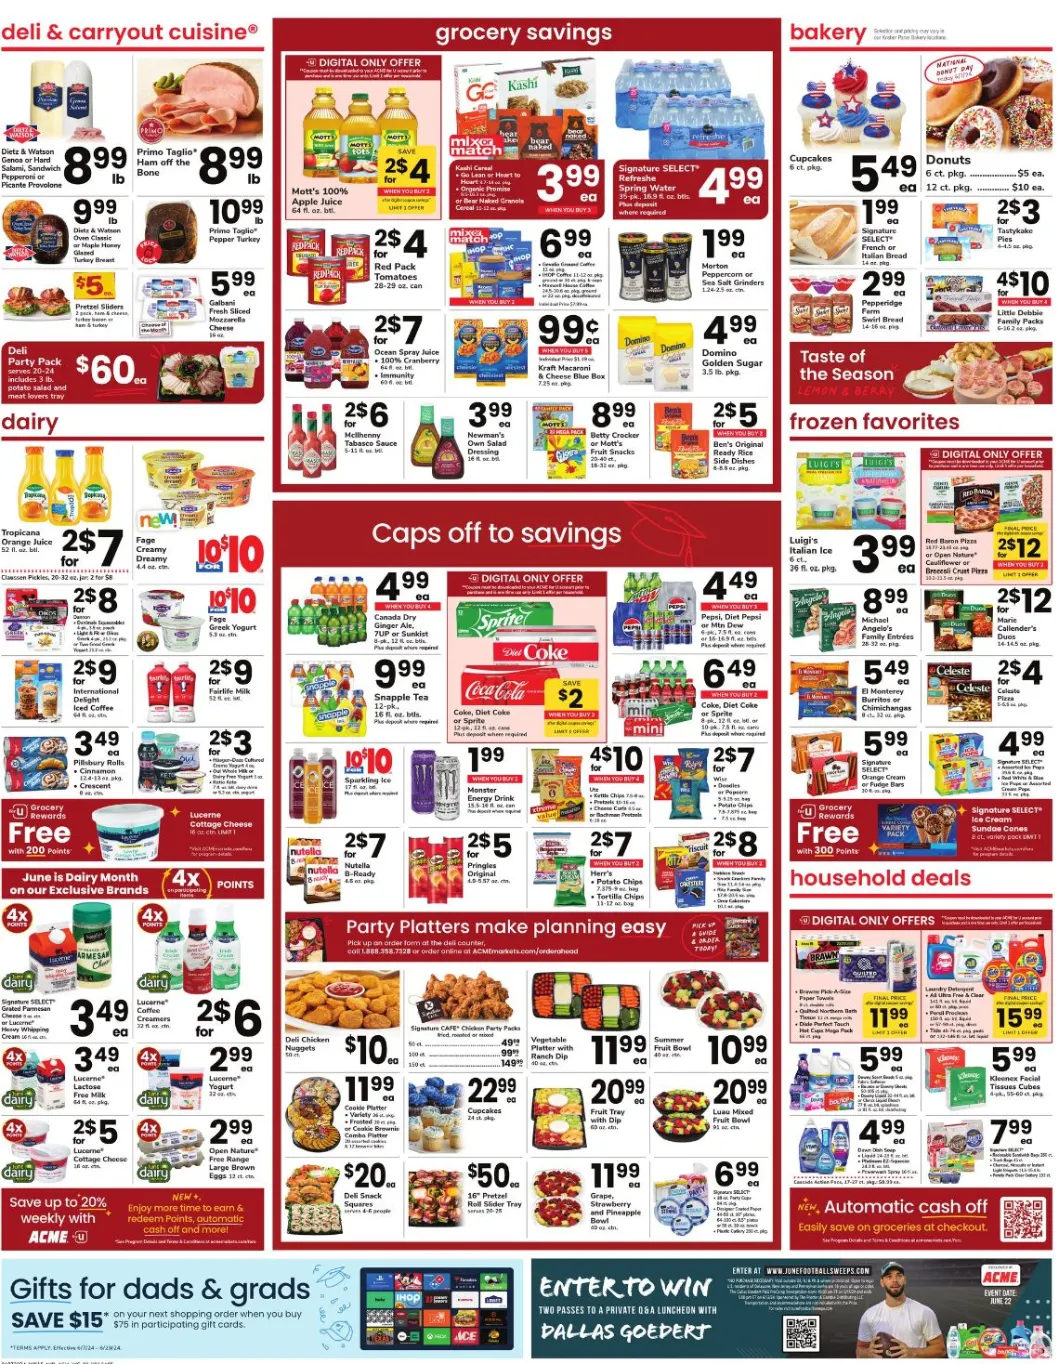 Acme July 2024 Weekly Sales, Deals, Discounts and Digital Coupons.